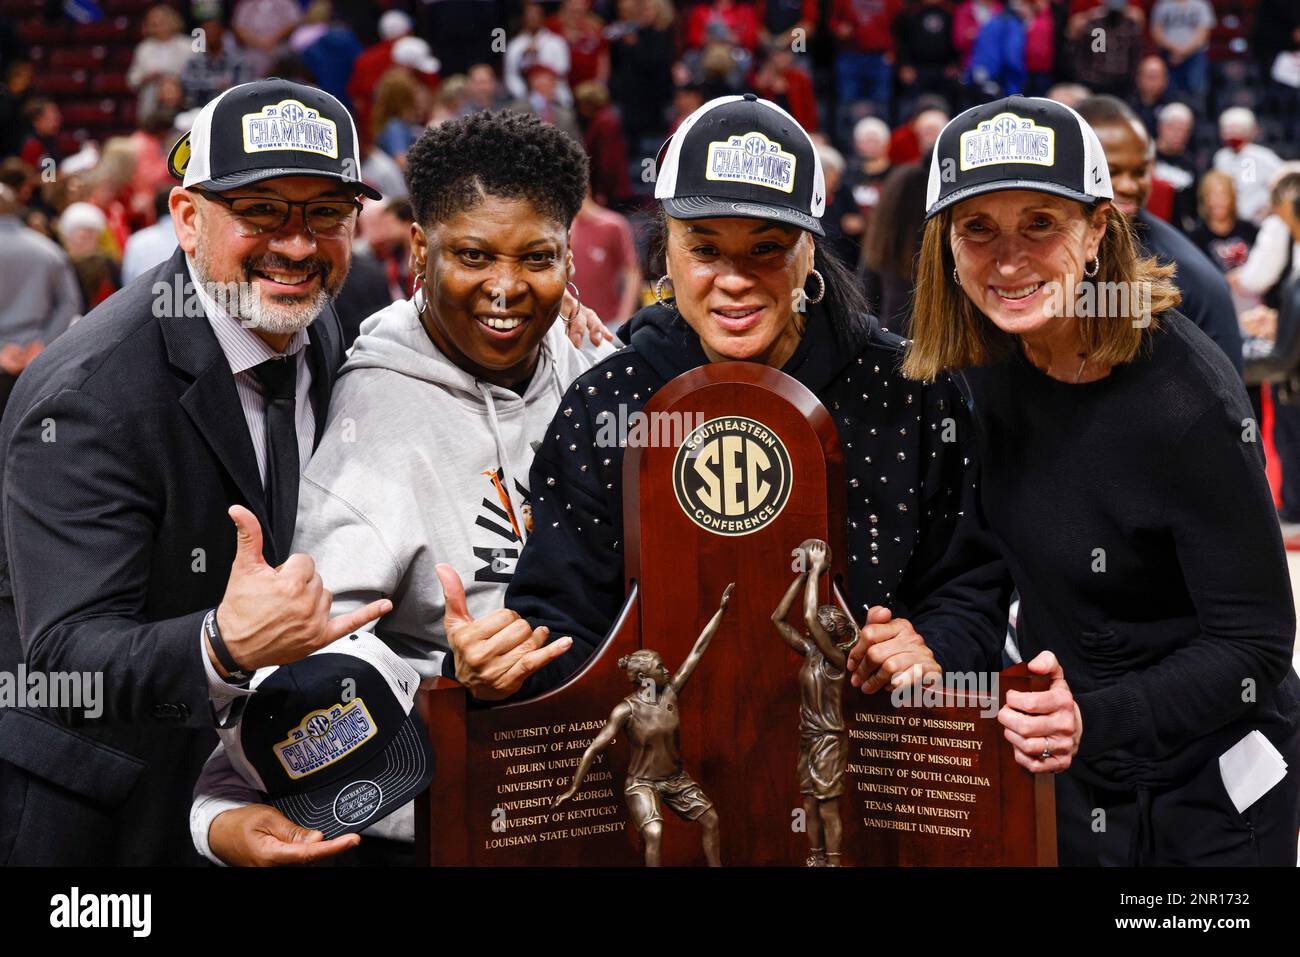 From left to right, South Carolina assistant coach assistant coach